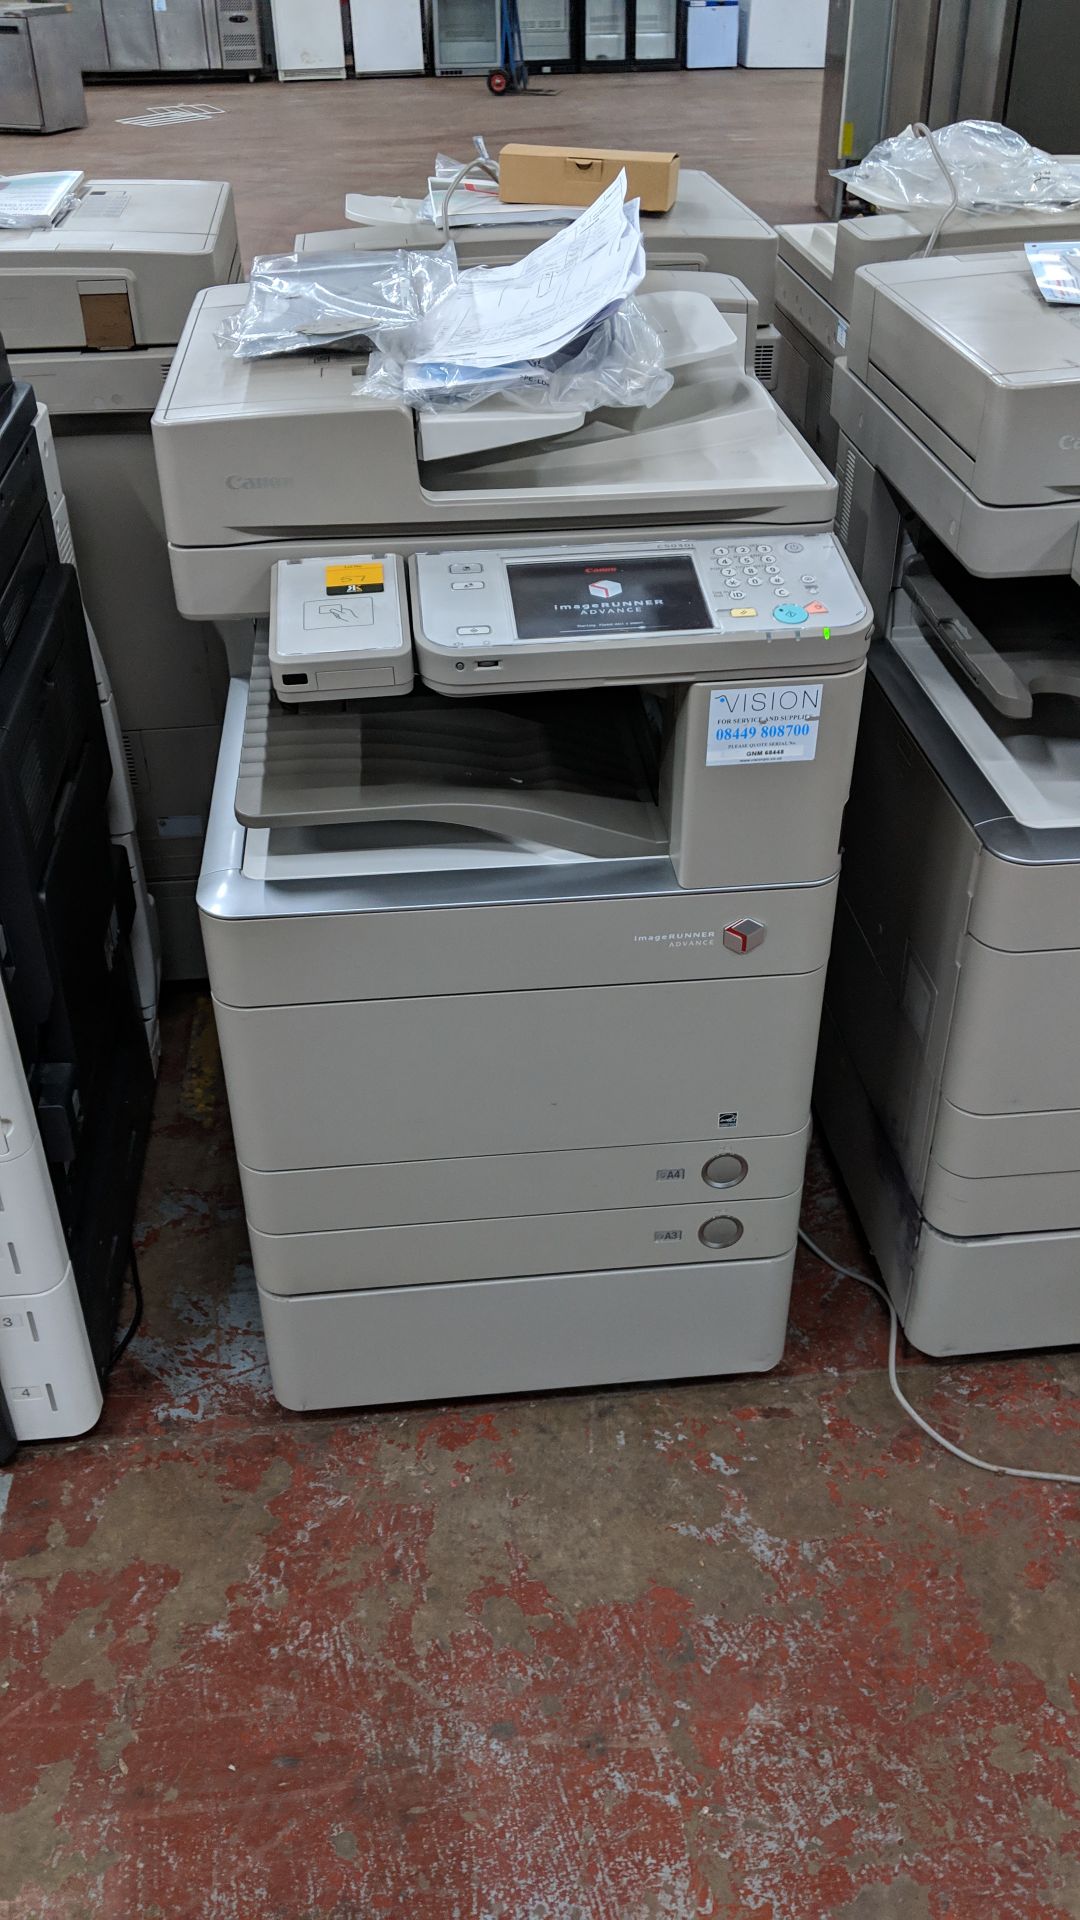 Canon imageRUNNER Advance model C5030i floorstanding copier with auto docufeed & pedestal - Image 3 of 6